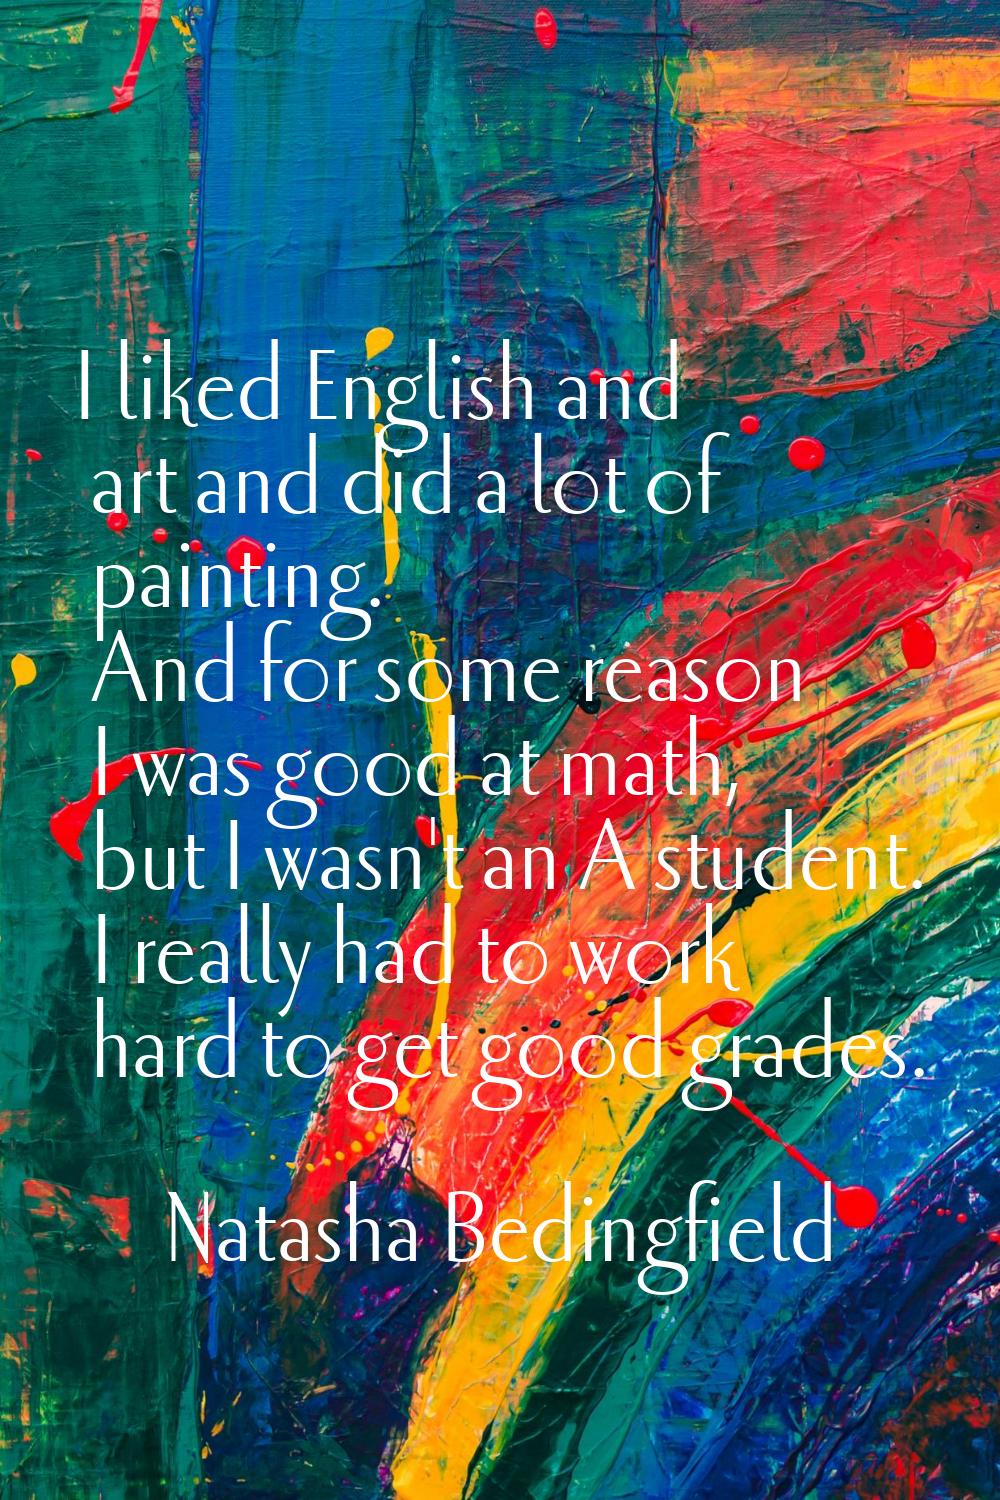 I liked English and art and did a lot of painting. And for some reason I was good at math, but I wa